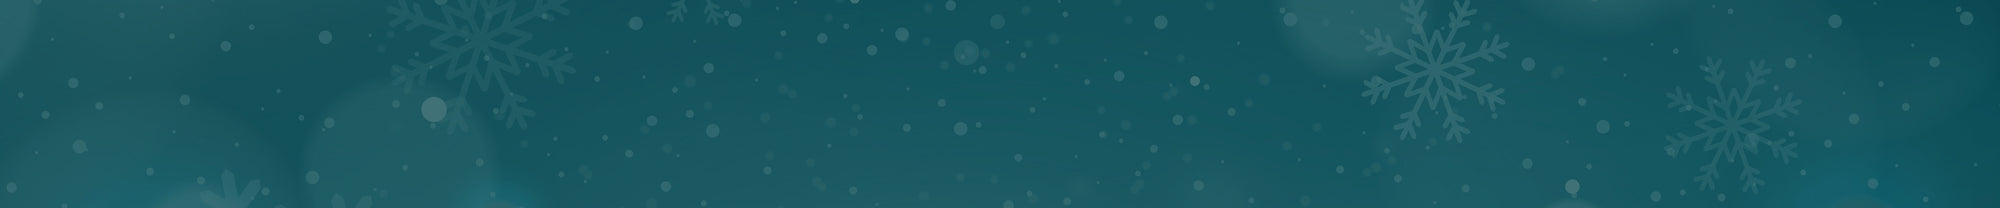 Collection Header Background Image of Snowflakes on Green Background